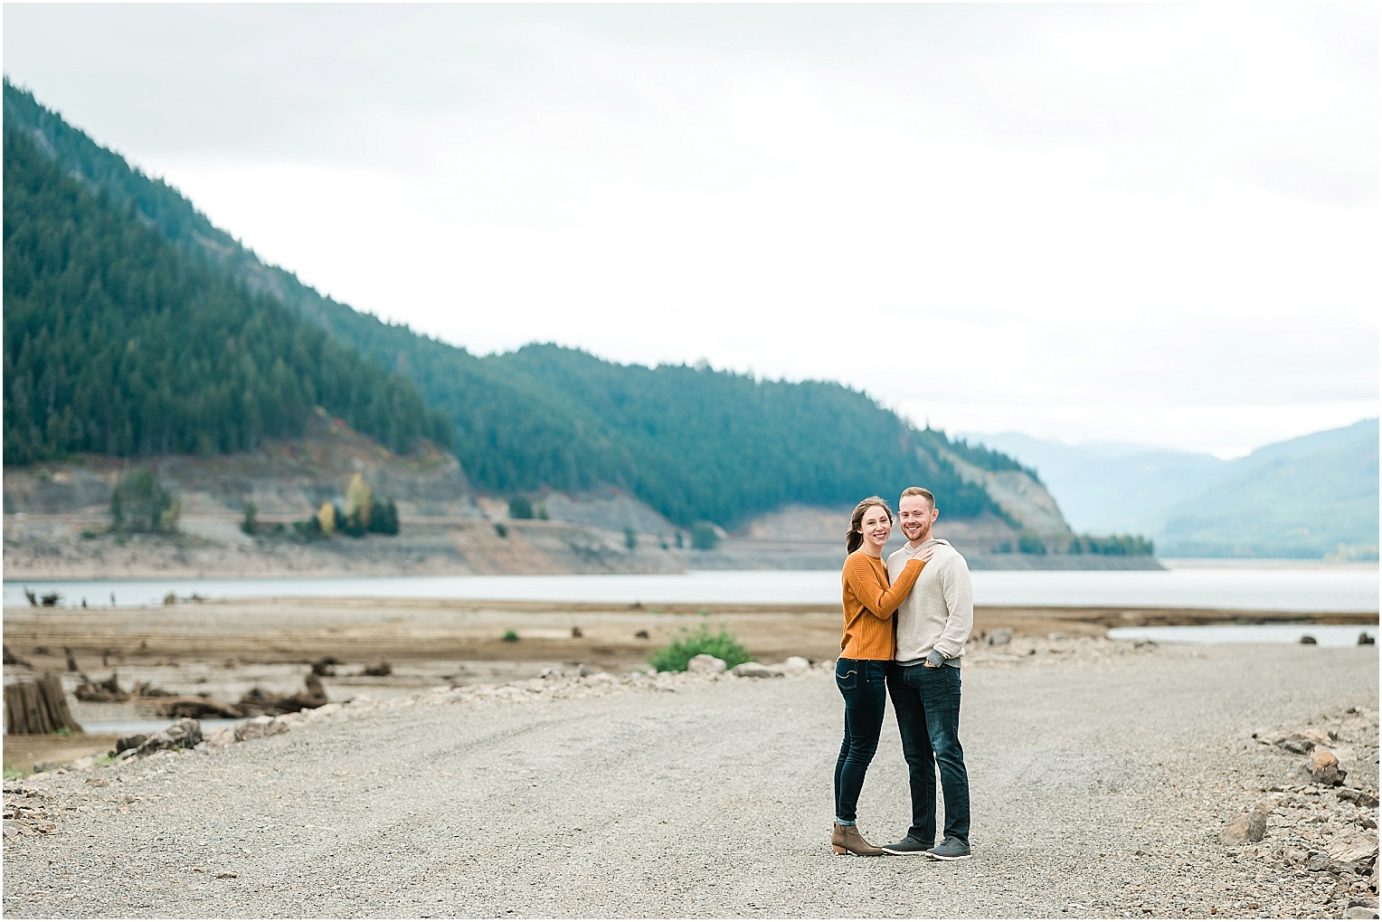 Keechelus Lake Engagement Session Snoqualmie Pass Sean and Megan hugging on the lake shore